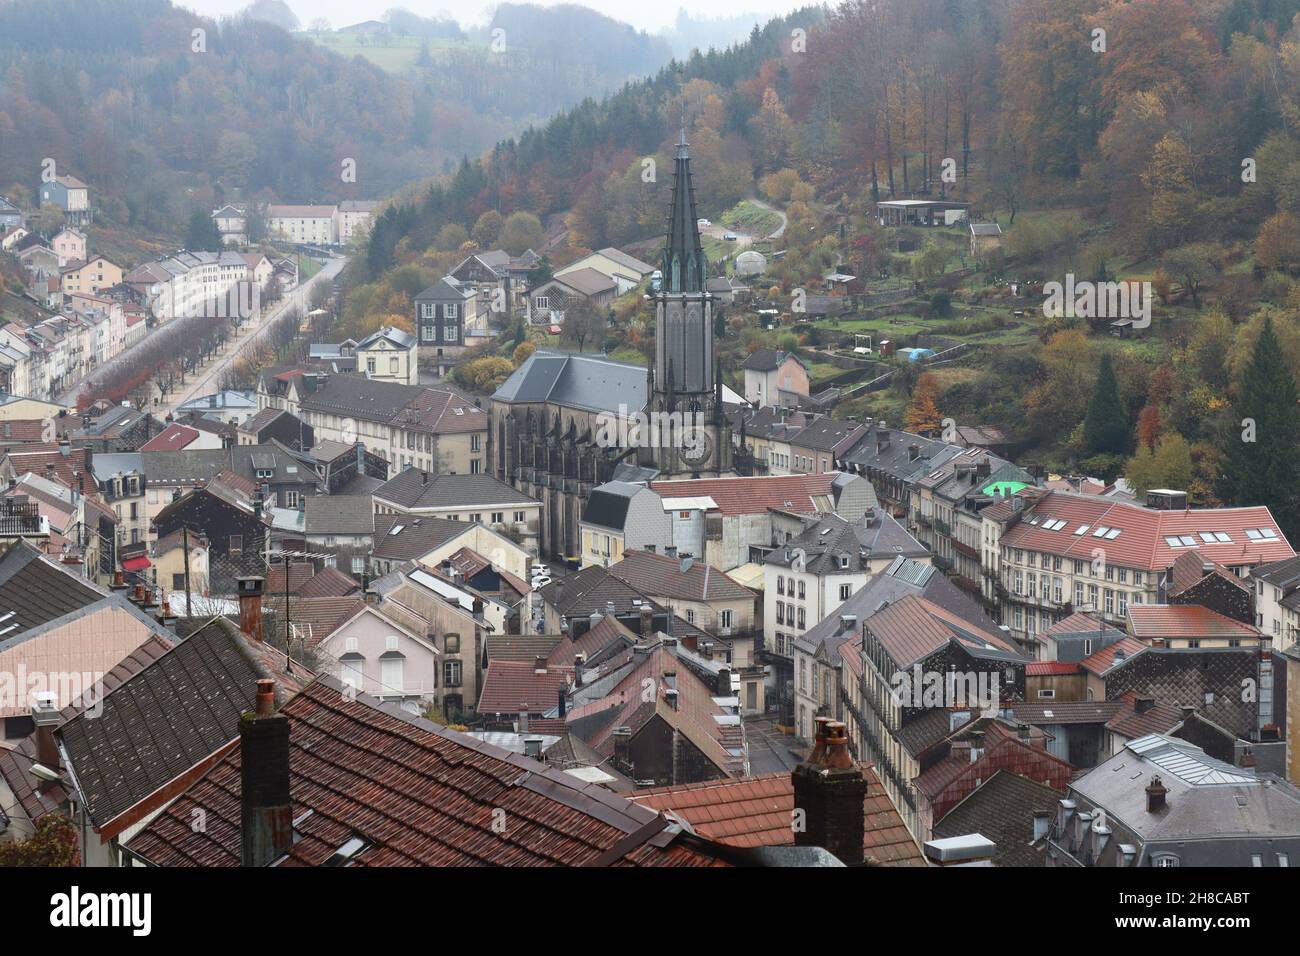 View of the historic spa town of Plombières-les-bains, in Vosges, France, on a misty autumn day. High angle view from the surrounding hillsides. Stock Photo